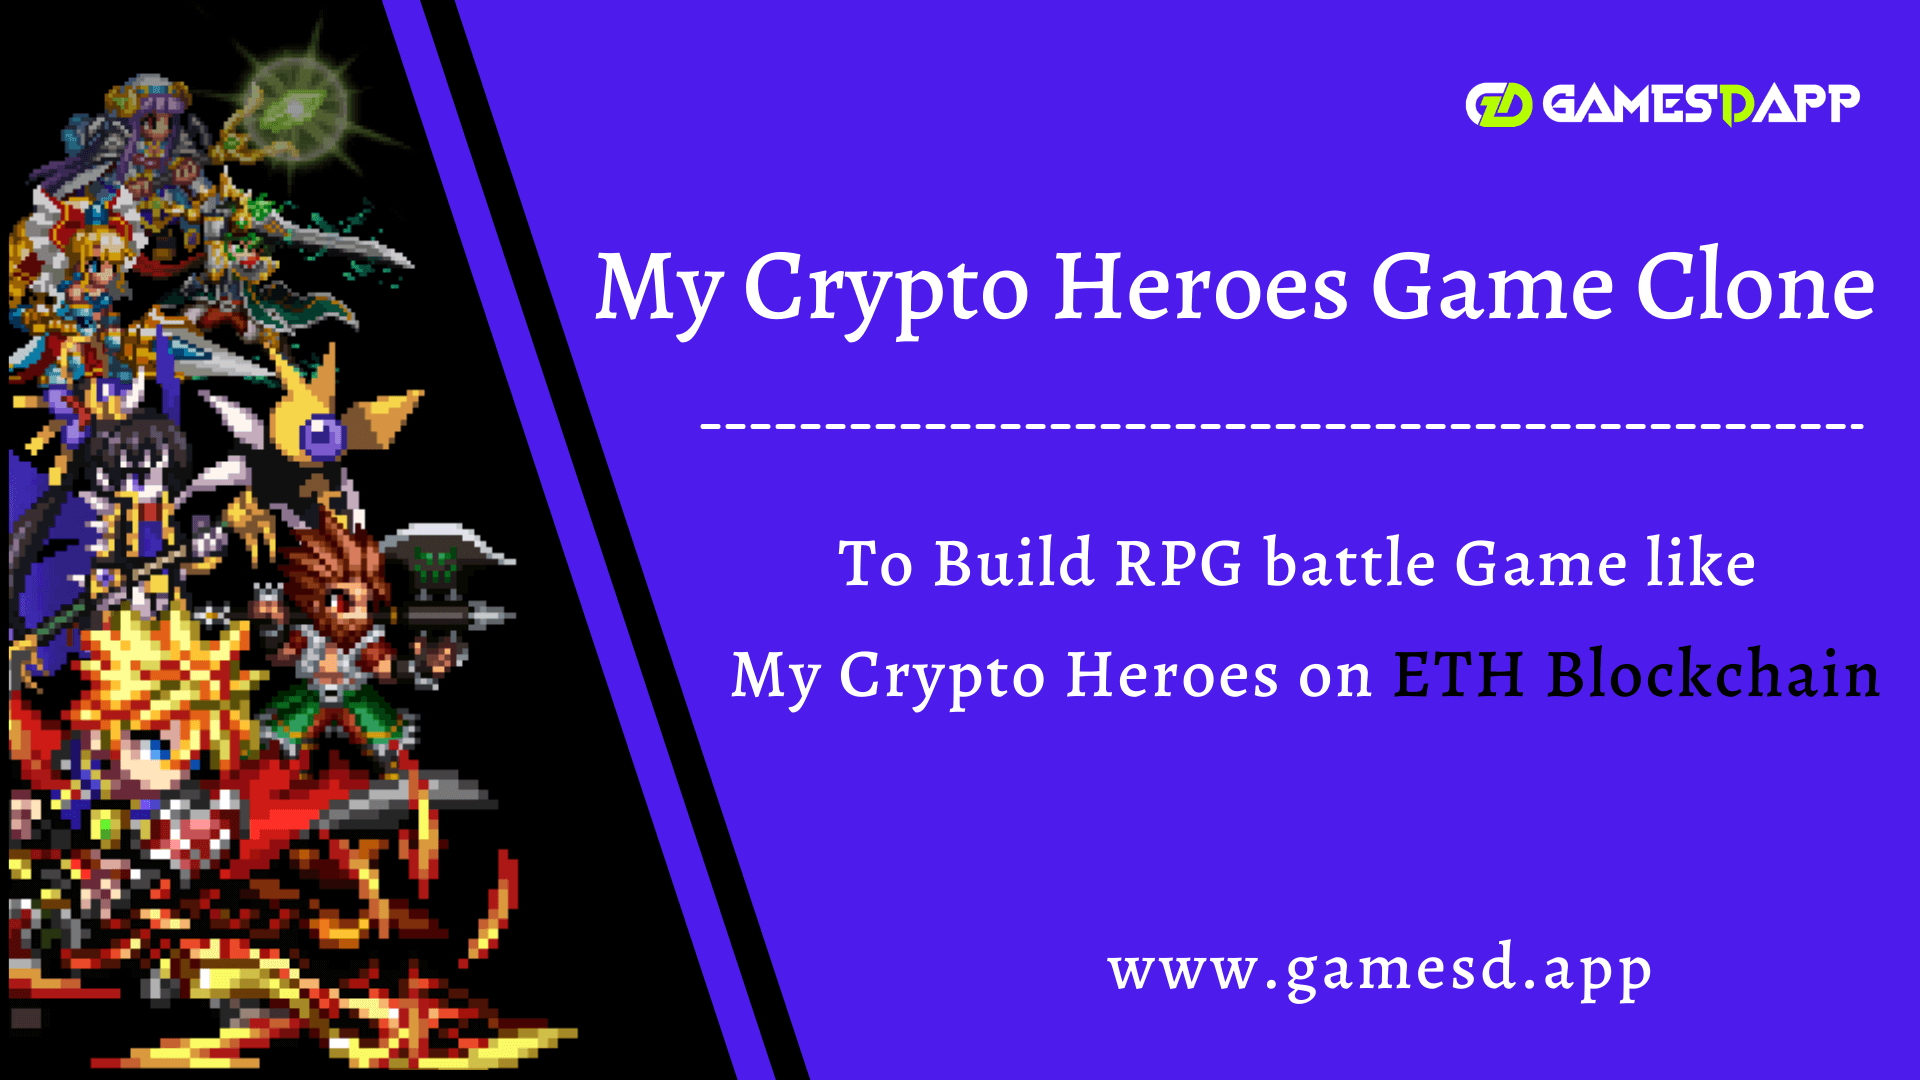 My Crypto Heroes Clone - To Build RPG battle Game like My Crypto Heroes on Ethereum Blockchain